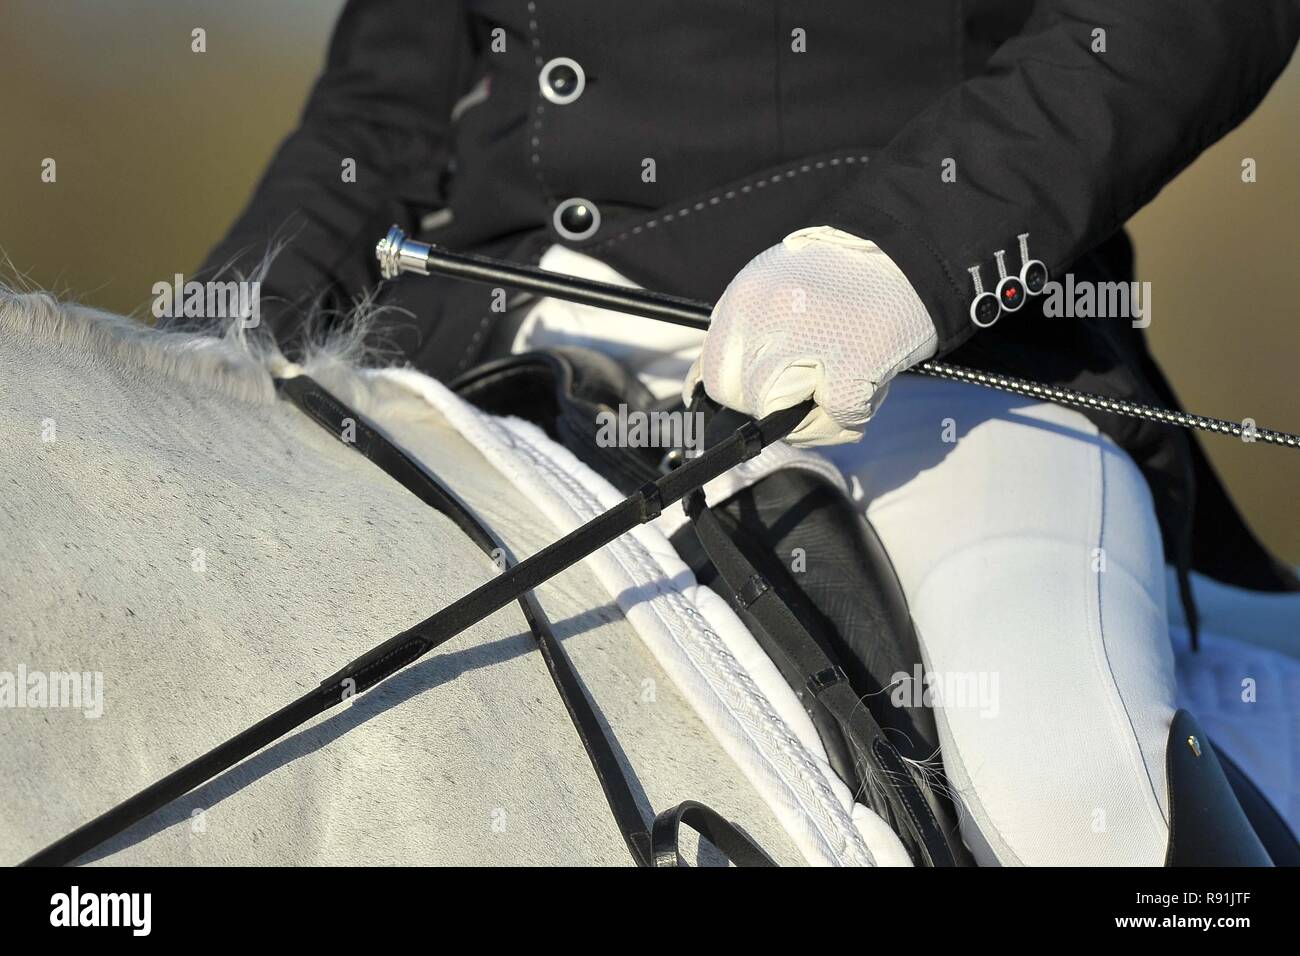 Grey dressage horse. White numnah. White gloves. reins. Black whip and jacket. Horse abstracts. 08/12/2018. Stock Photo